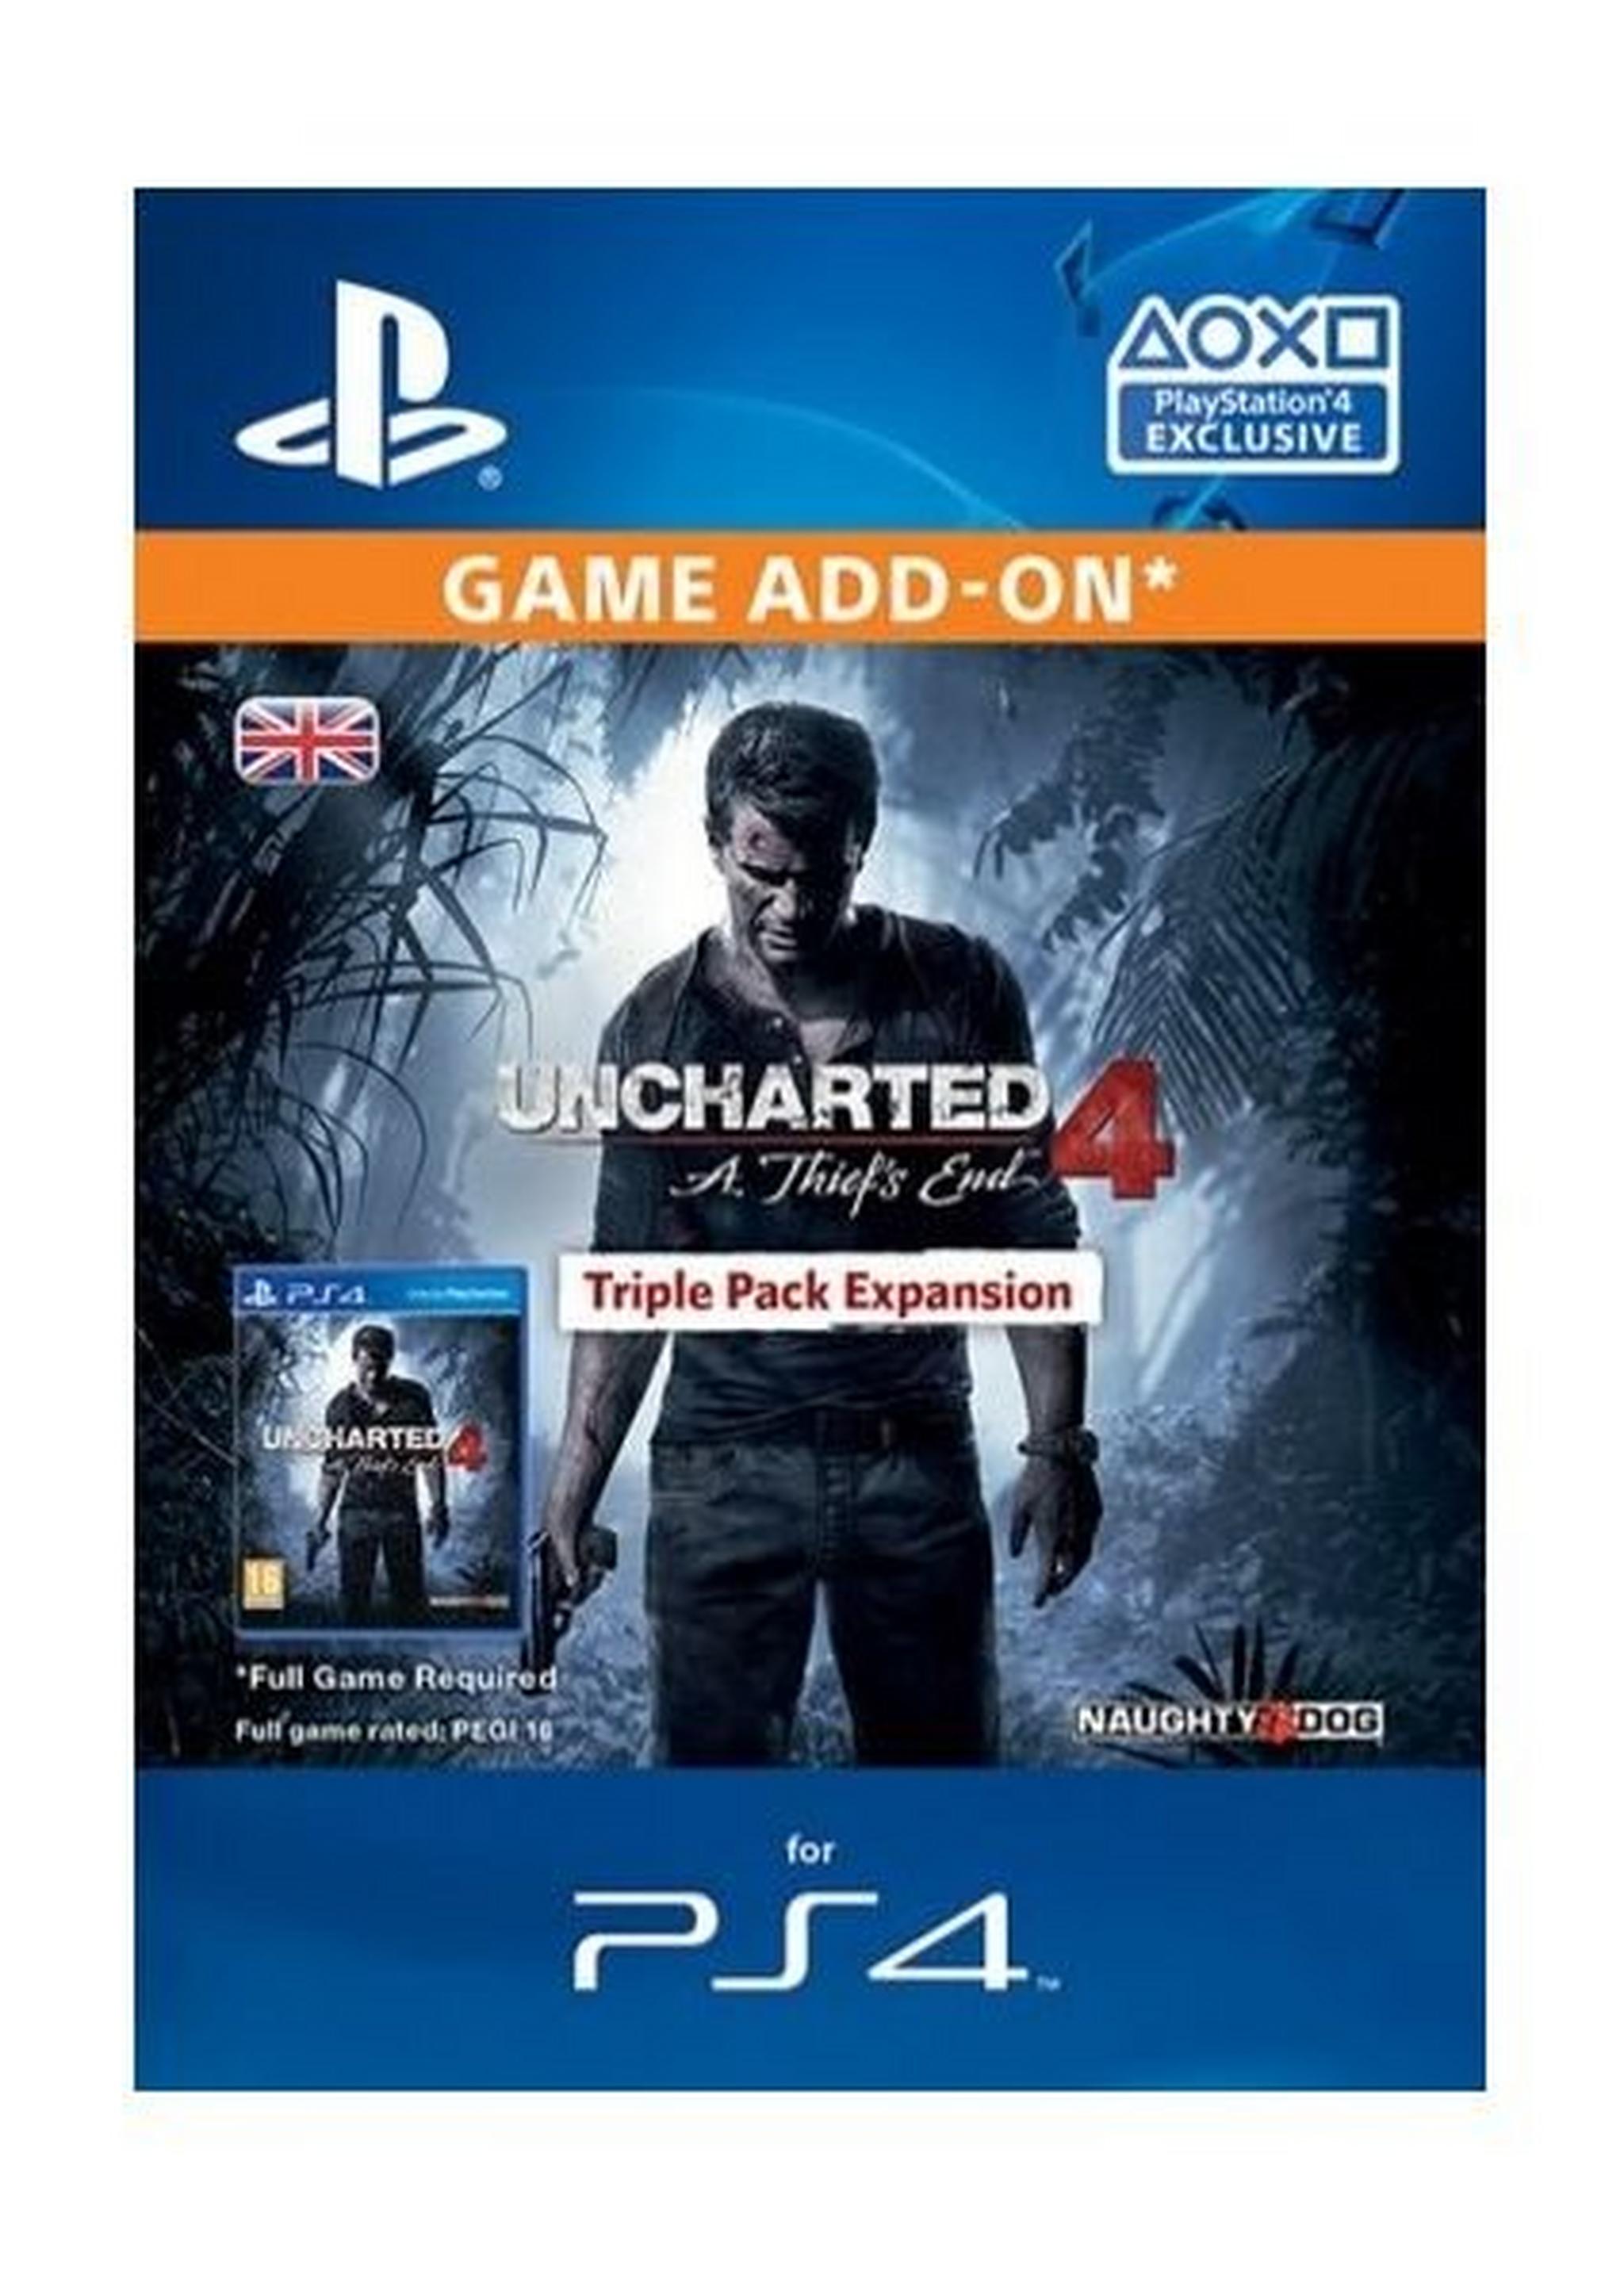 Sony PS4 Slim 1TB Console + Uncharted 4 + Horizon Zero Dawn + 3 Months Subscription + Uncharted 4: A Thief’s End – Triple Expansion Pack